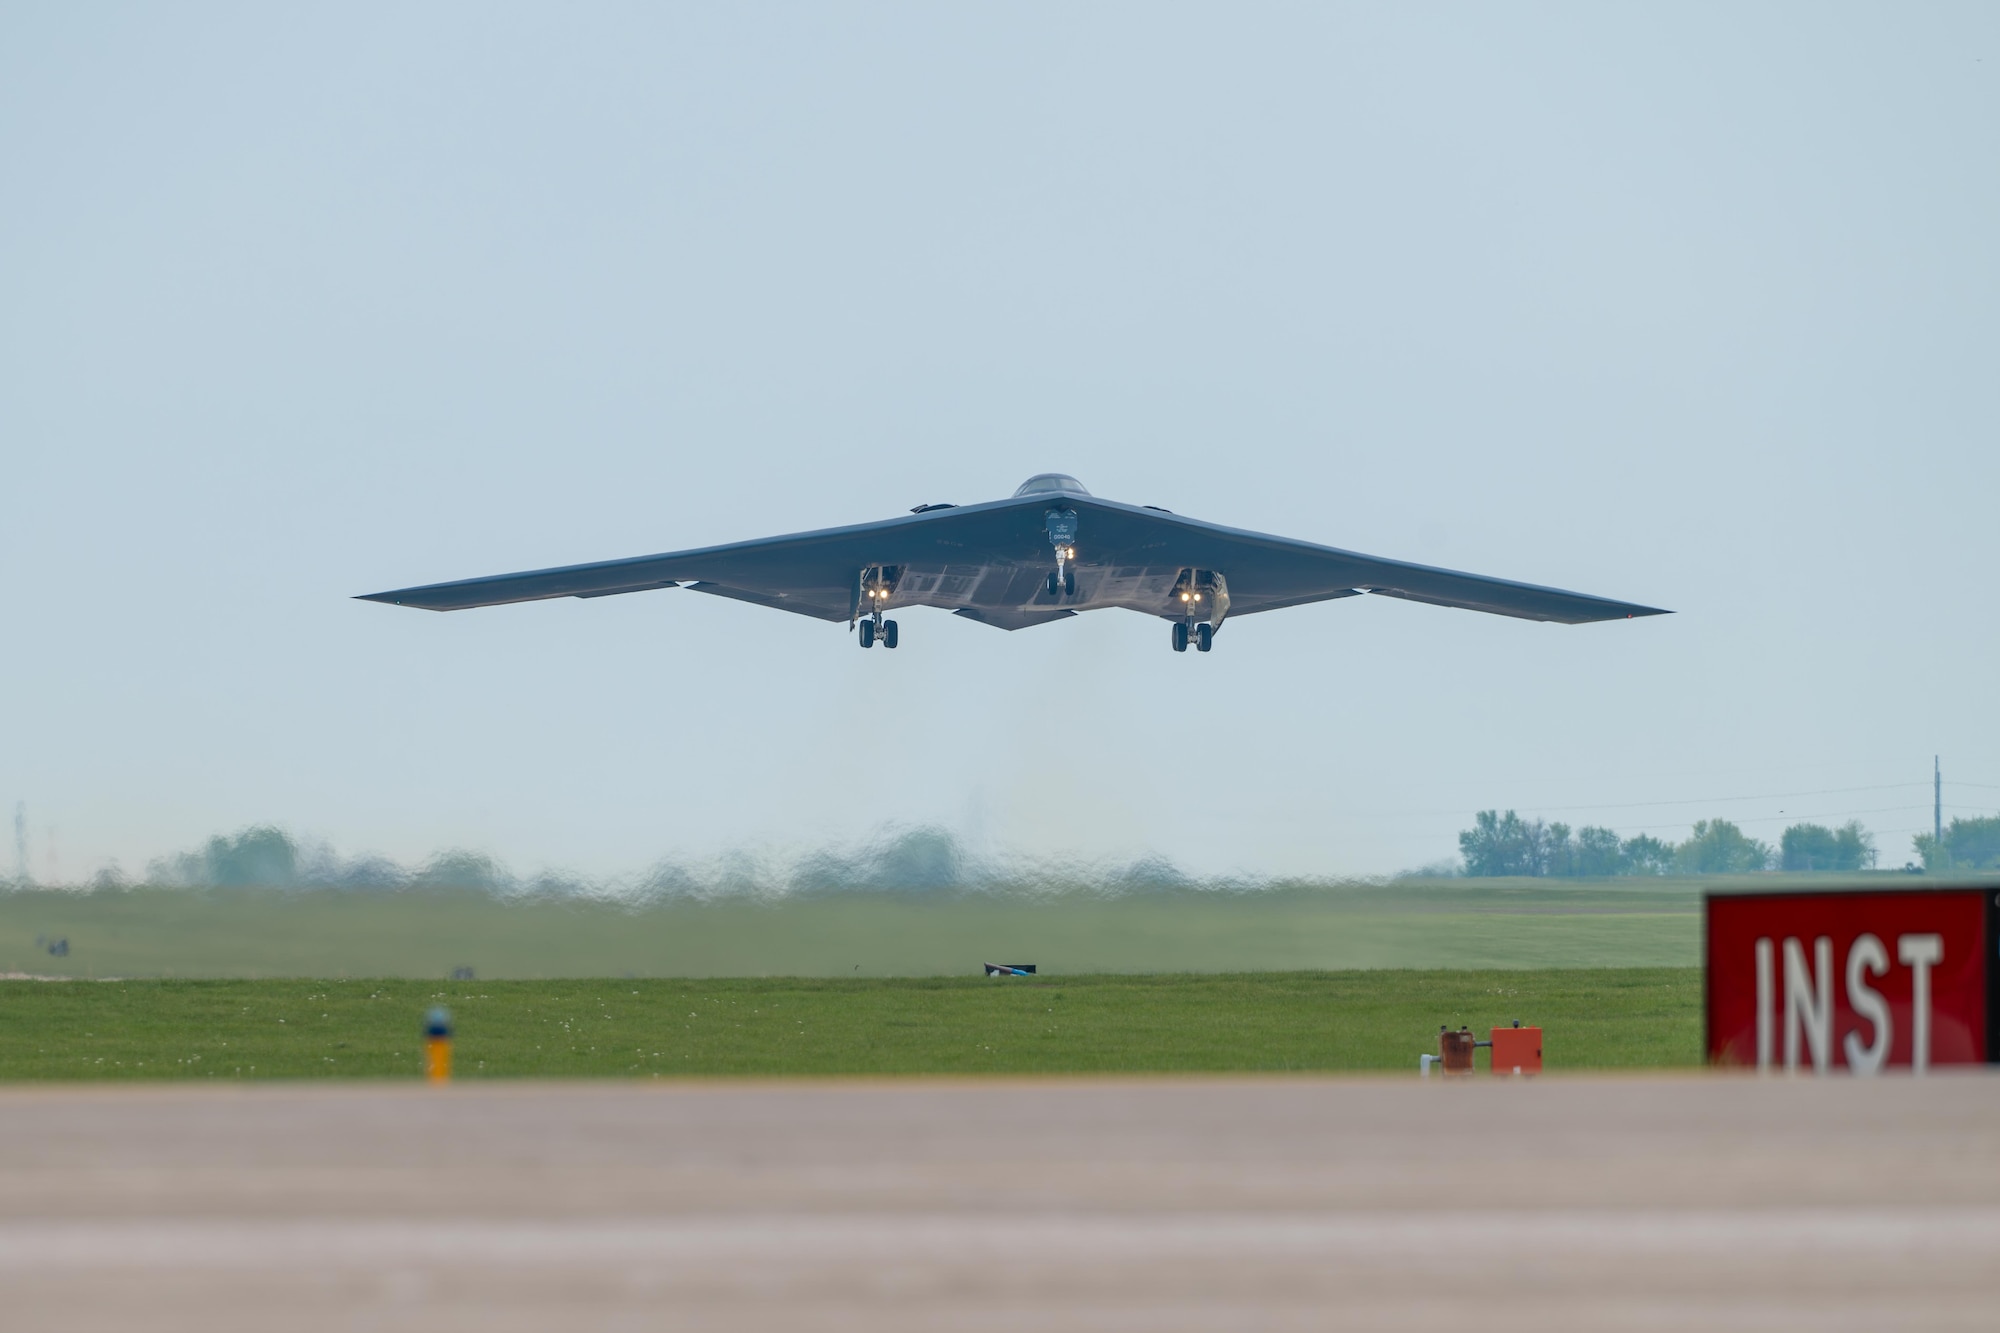 A B-2 Spirit stealth bomber assigned to the 509th Bomb Wing takes off at Whiteman Air Force Base, Mo., April 15, 2024. Team Whiteman executed a mass fly-over of 12 B-2 Spirit stealth bombers to cap off the annual Spirit Vigilance exercise. Routine training ensures that Airmen are always ready to execute global strike operations… anytime, anywhere.. (U.S. Air Force photo by Airman 1st Class Matthew S. Domingos)